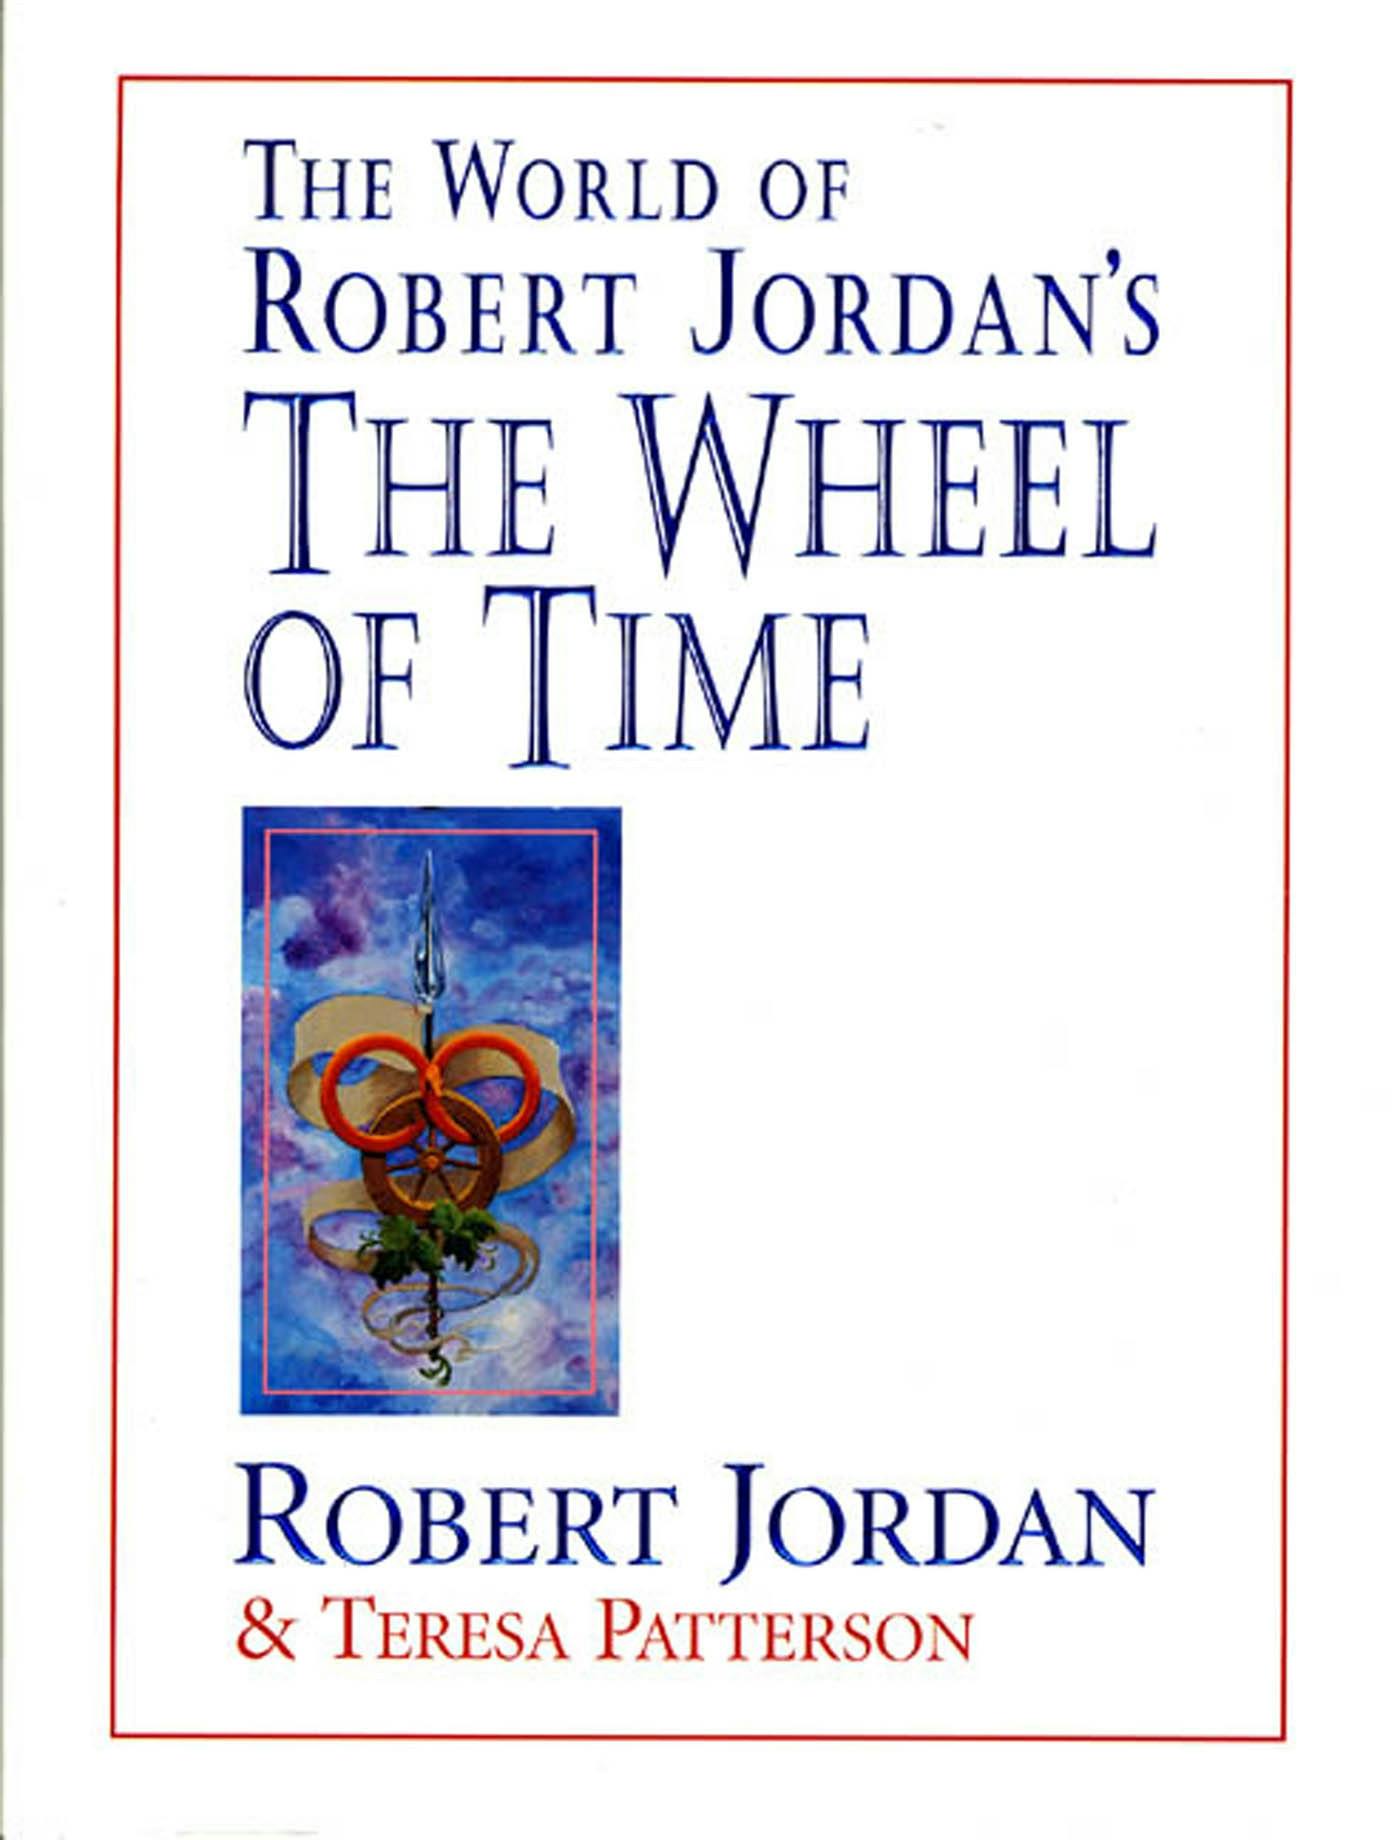 Cover for the book titled as: The World of Robert Jordan's The Wheel of Time